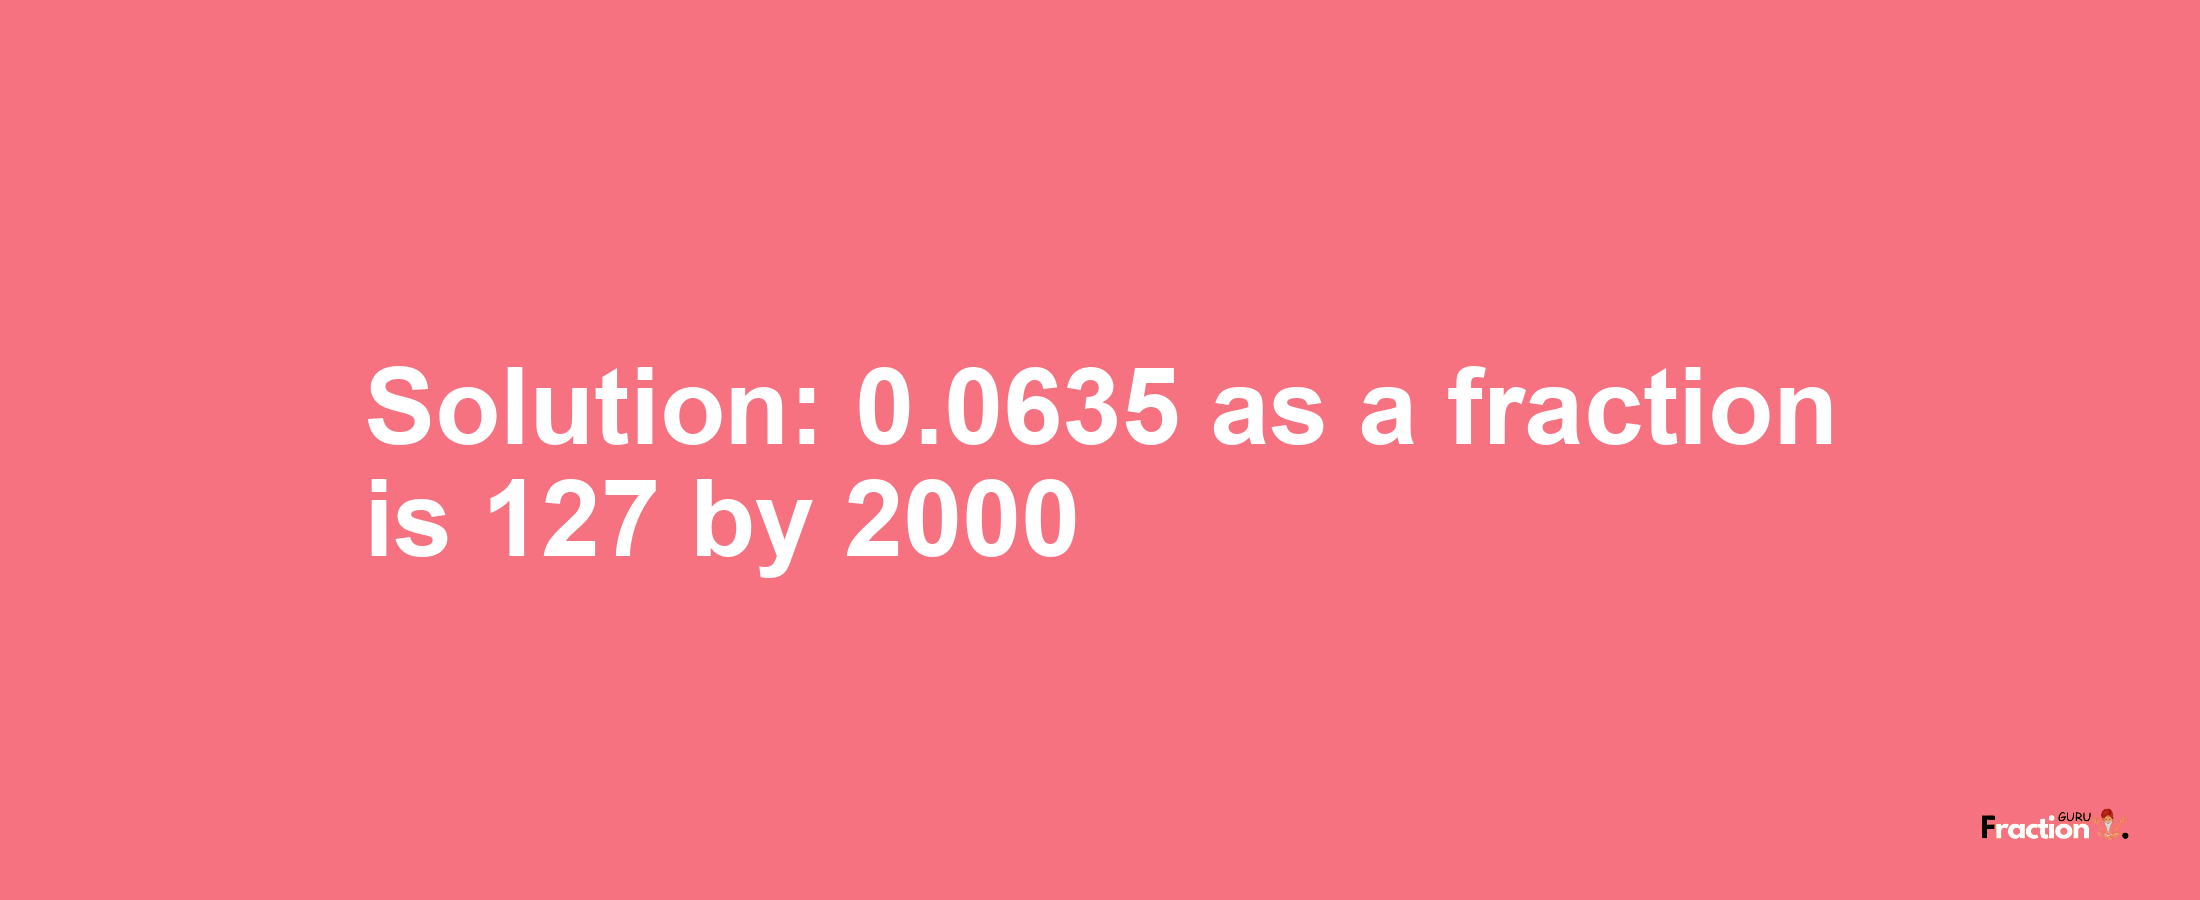 Solution:0.0635 as a fraction is 127/2000